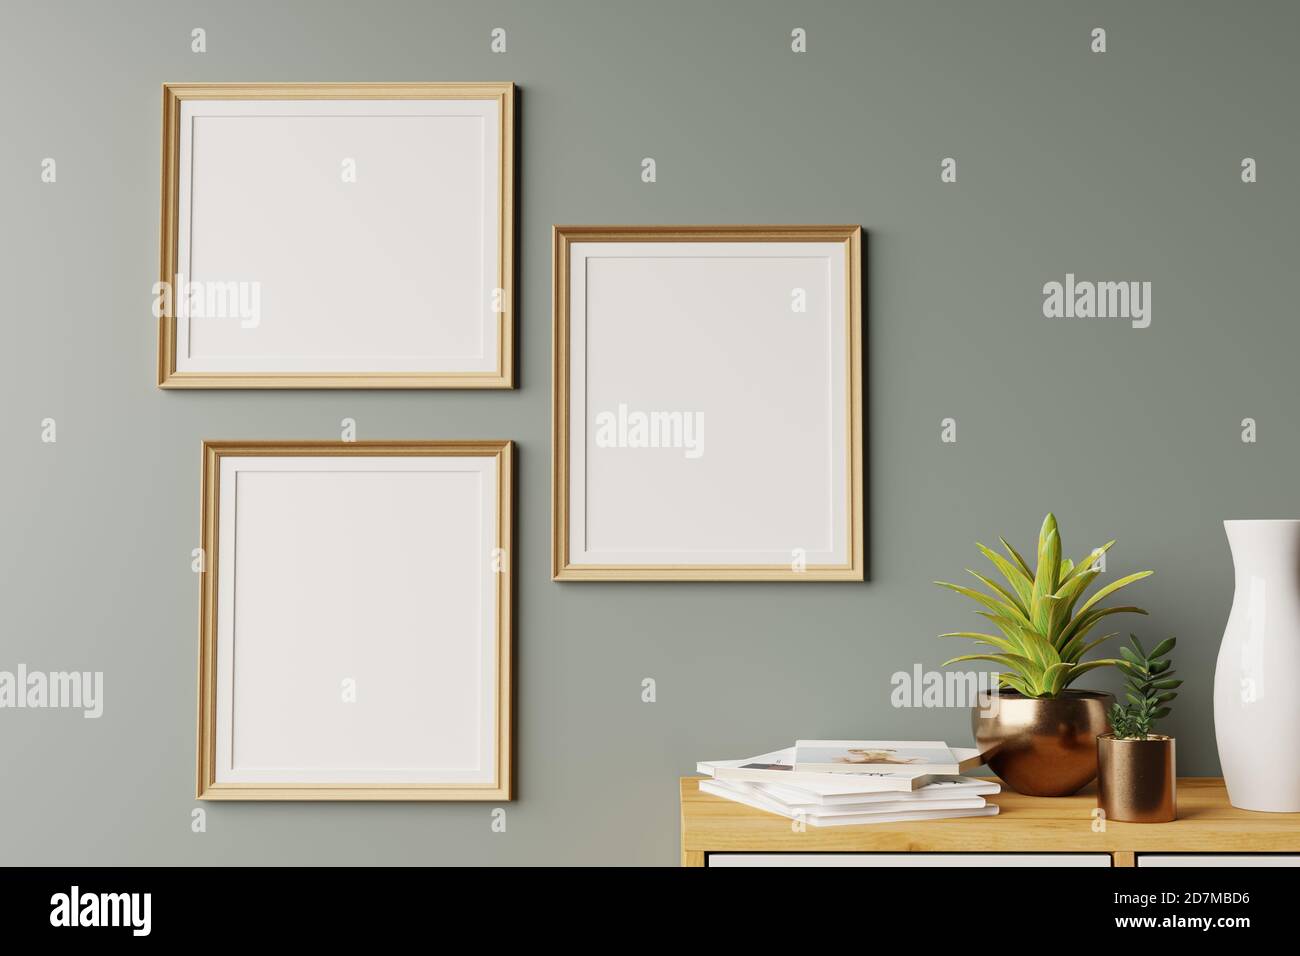 Home interior poster mock up with vertical wood frame with ornamental plants in pots on empty wall background. Stock Photo